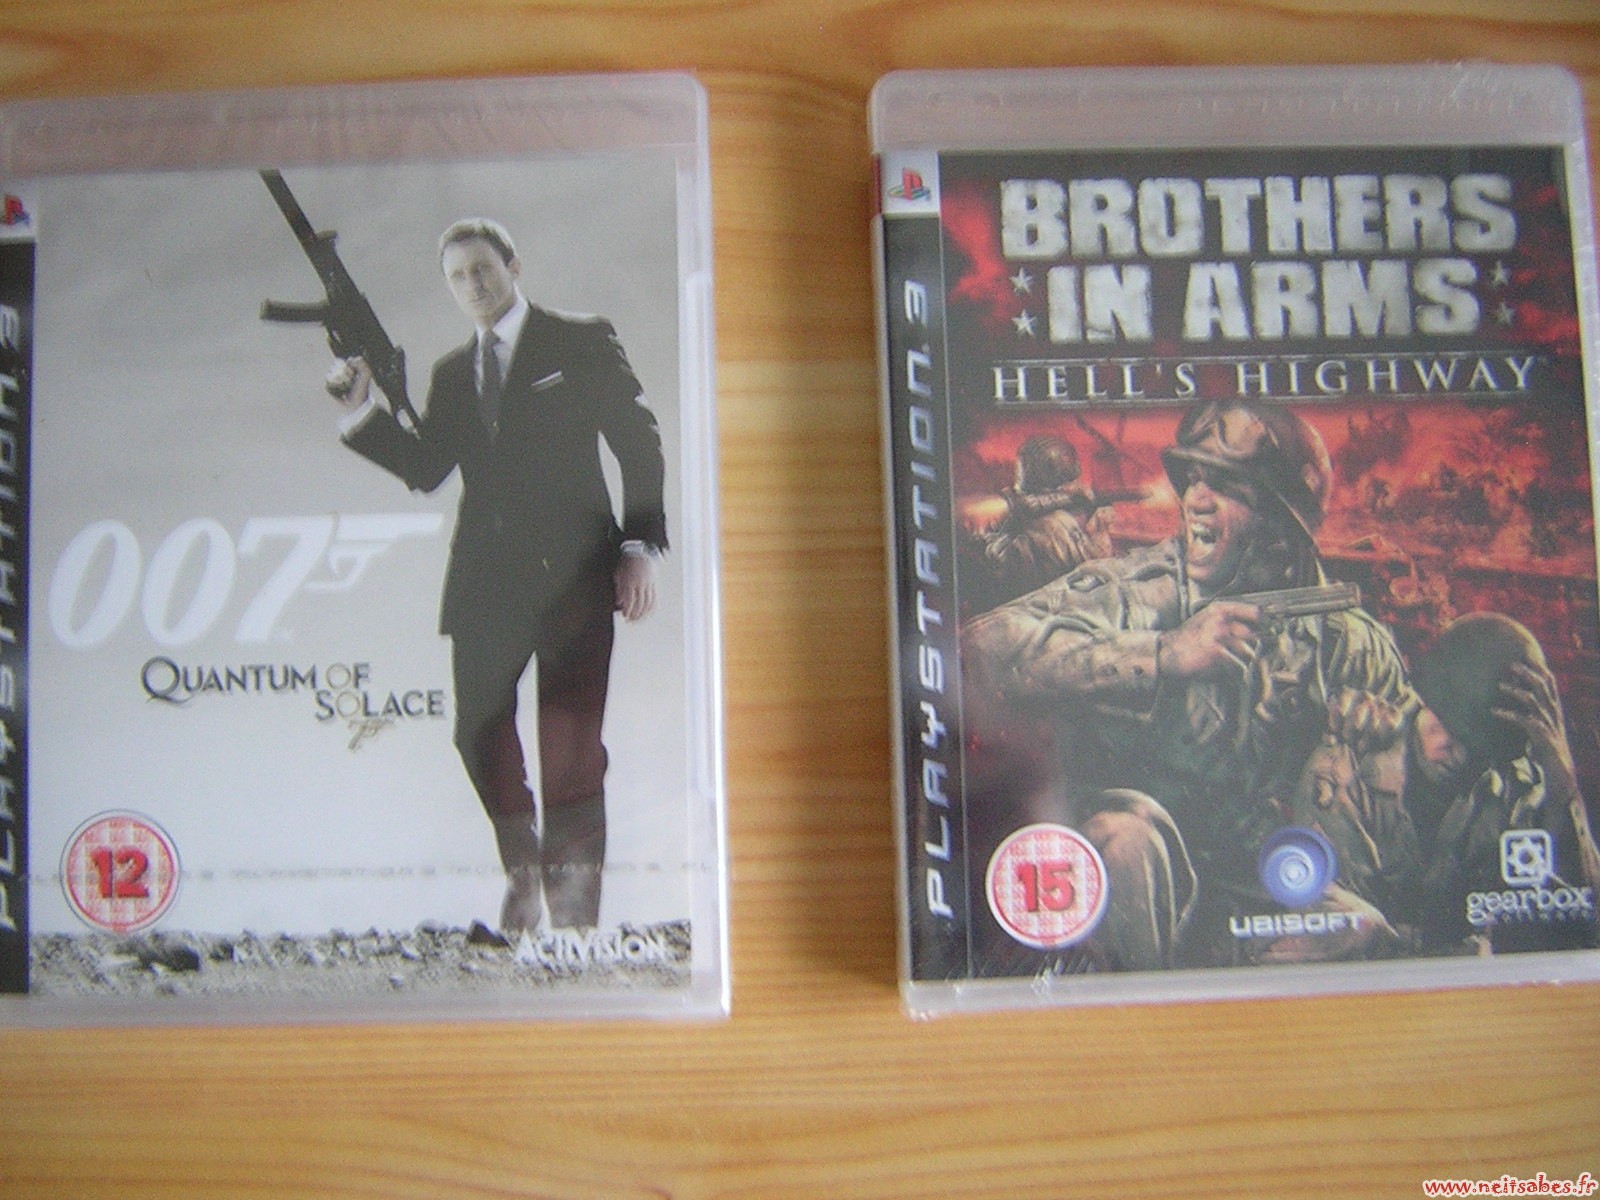 C'est arrivé ! - 007 Quantum Of Solace, Brothers In Arms : Hell's Highway